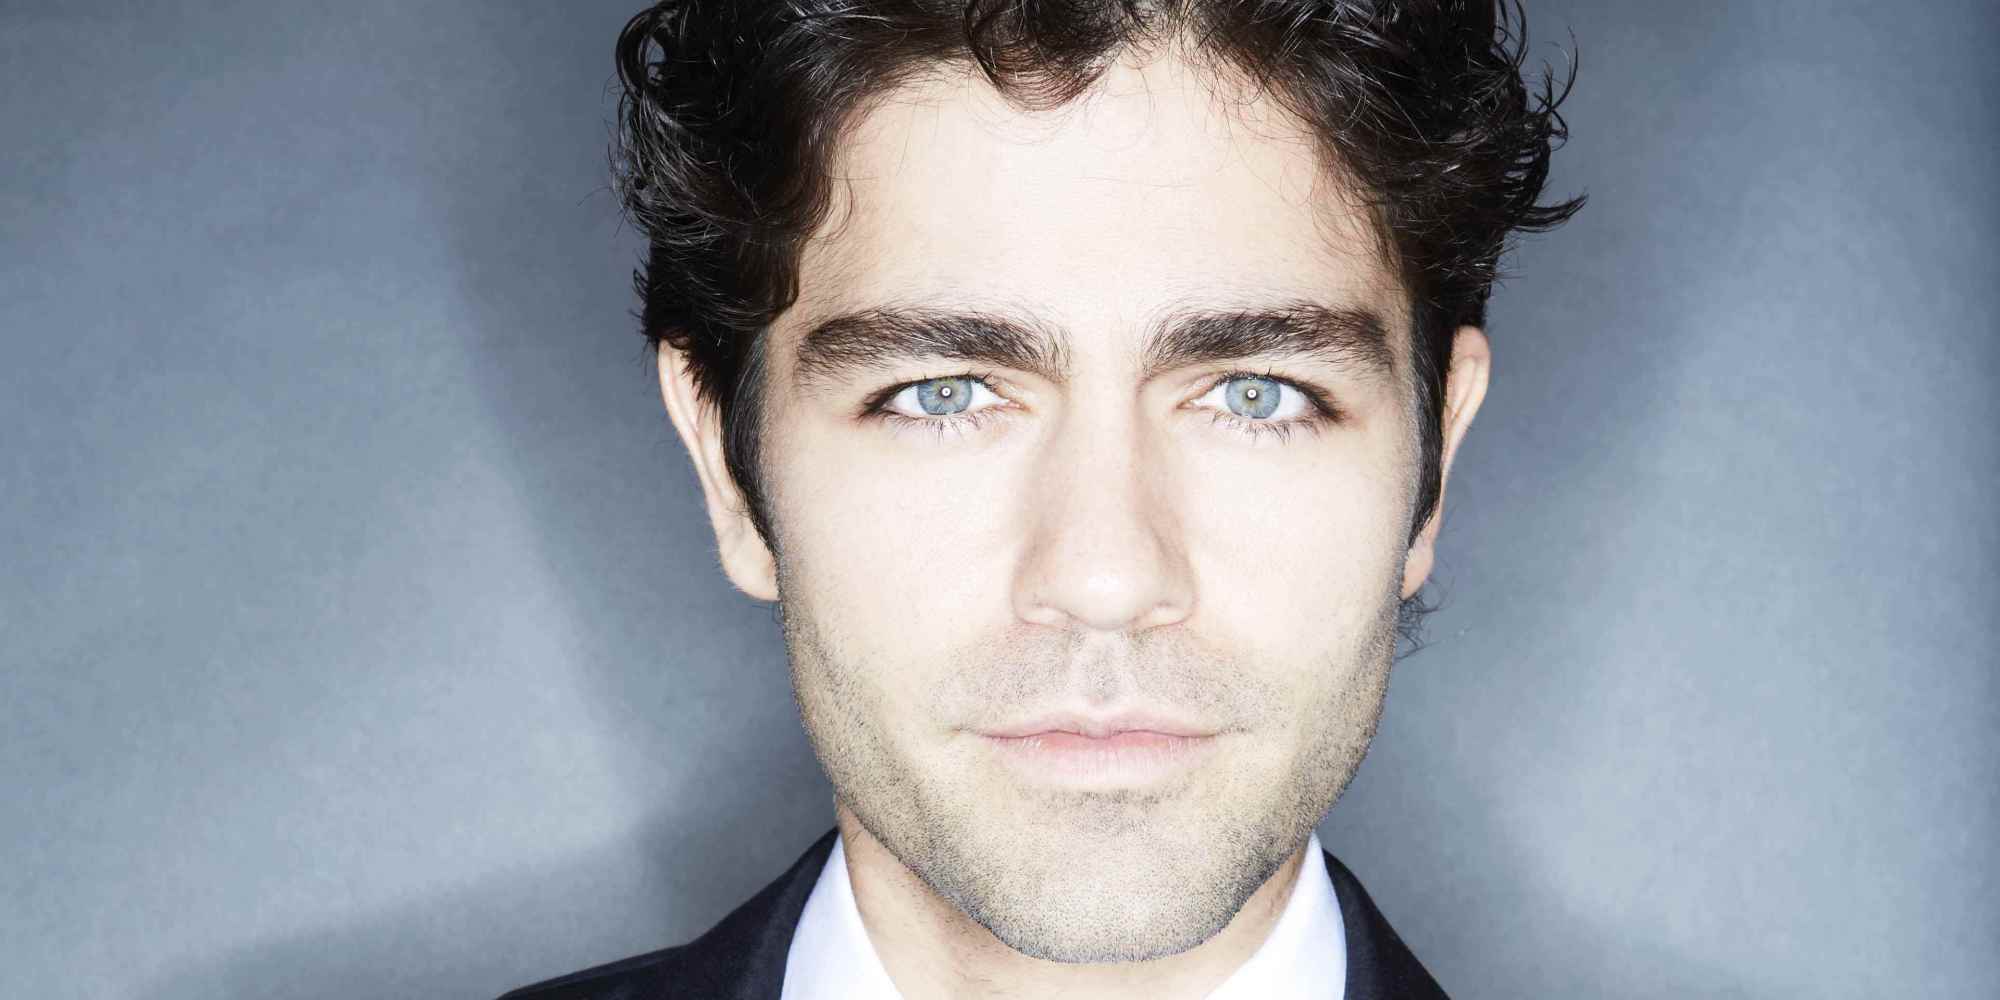 More Pictures Of Adrian Grenier. 